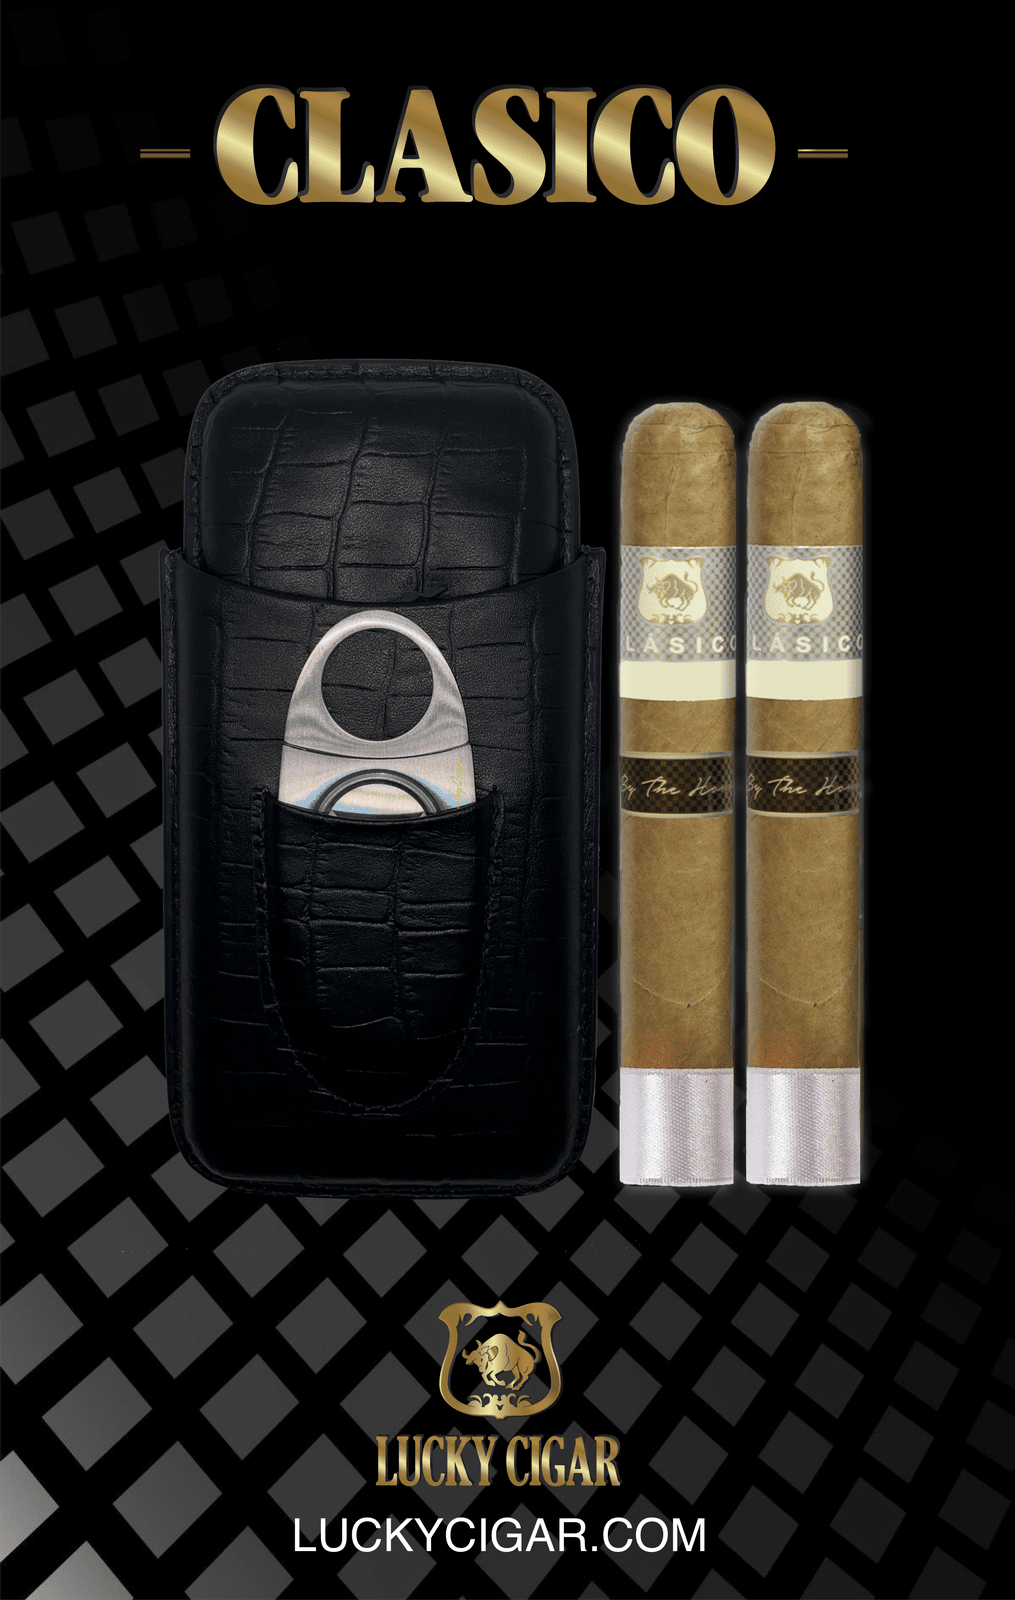 Classic Cigars - Classico by Lucky Cigar: Set of 2 Cigars, Robusto with Humidor, Cutter